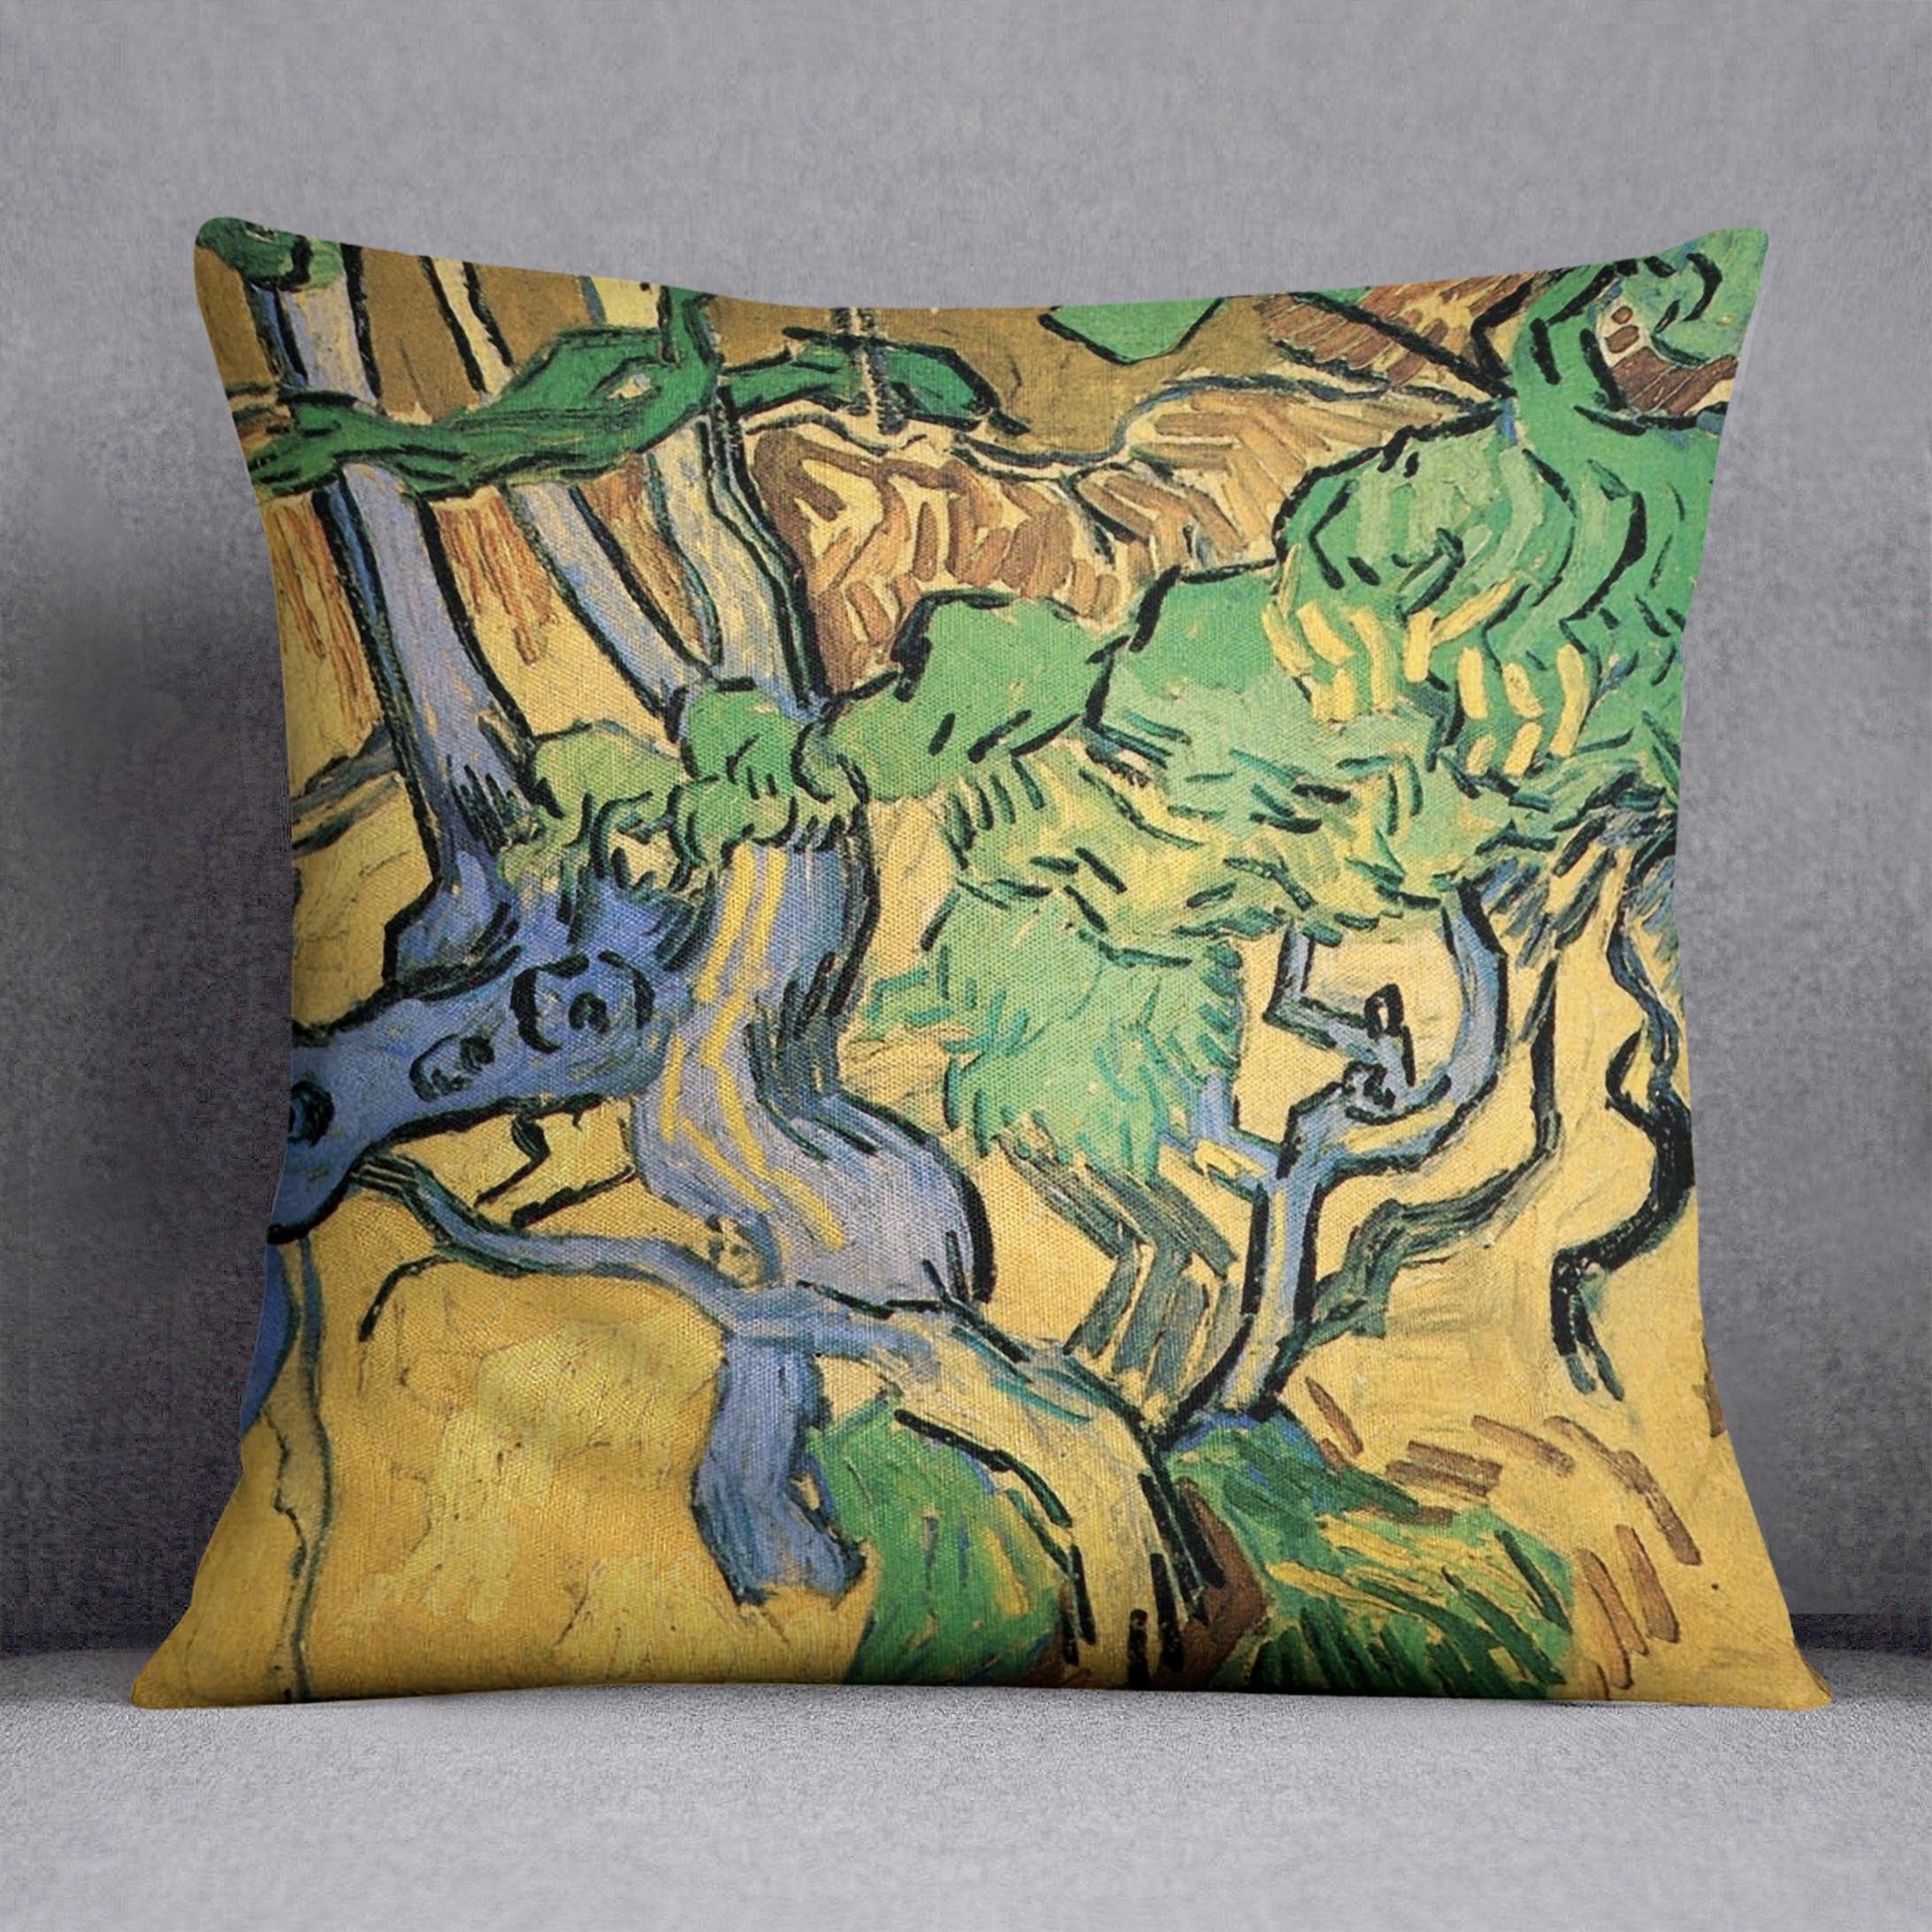 Tree Roots and Trunks by Van Gogh Throw Pillow